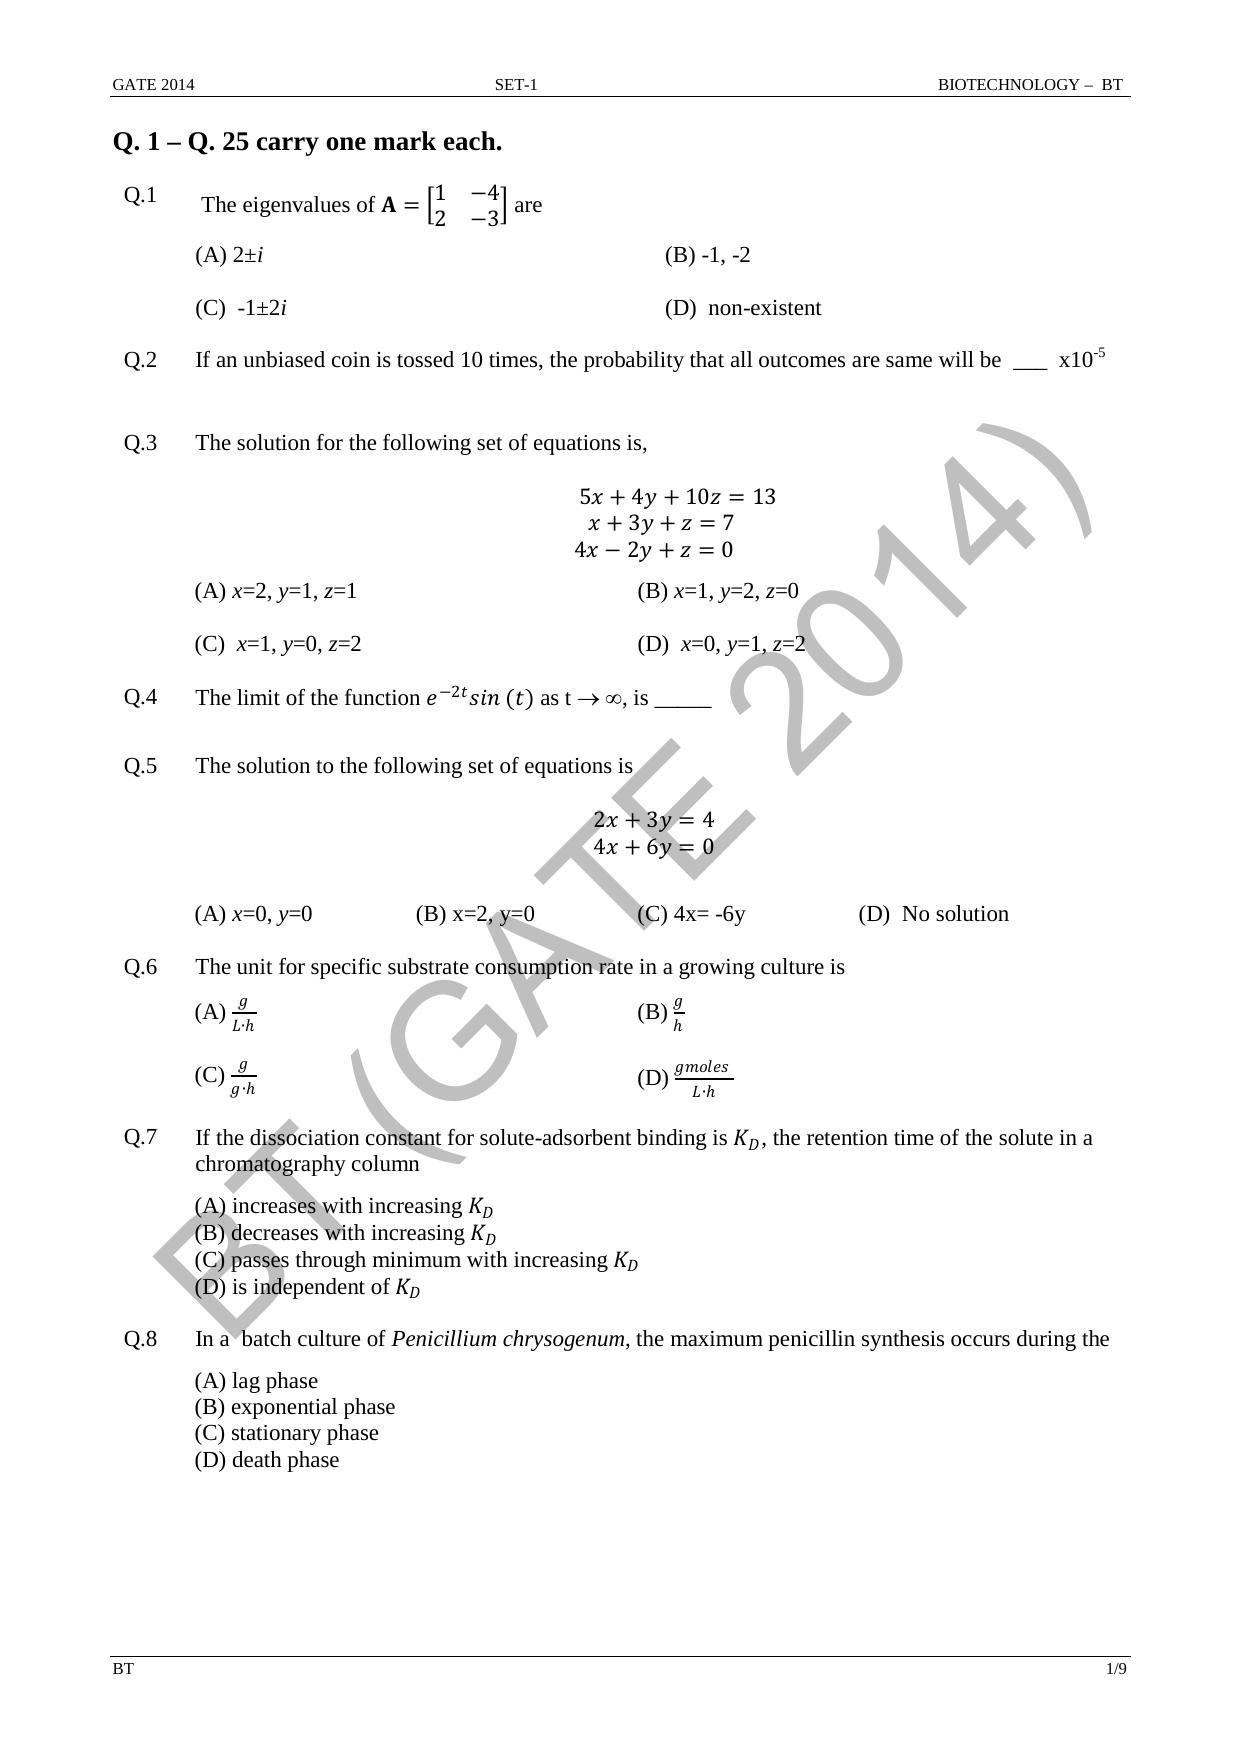 GATE 2014 Biotechnology (BT) Question Paper with Answer Key - Page 7